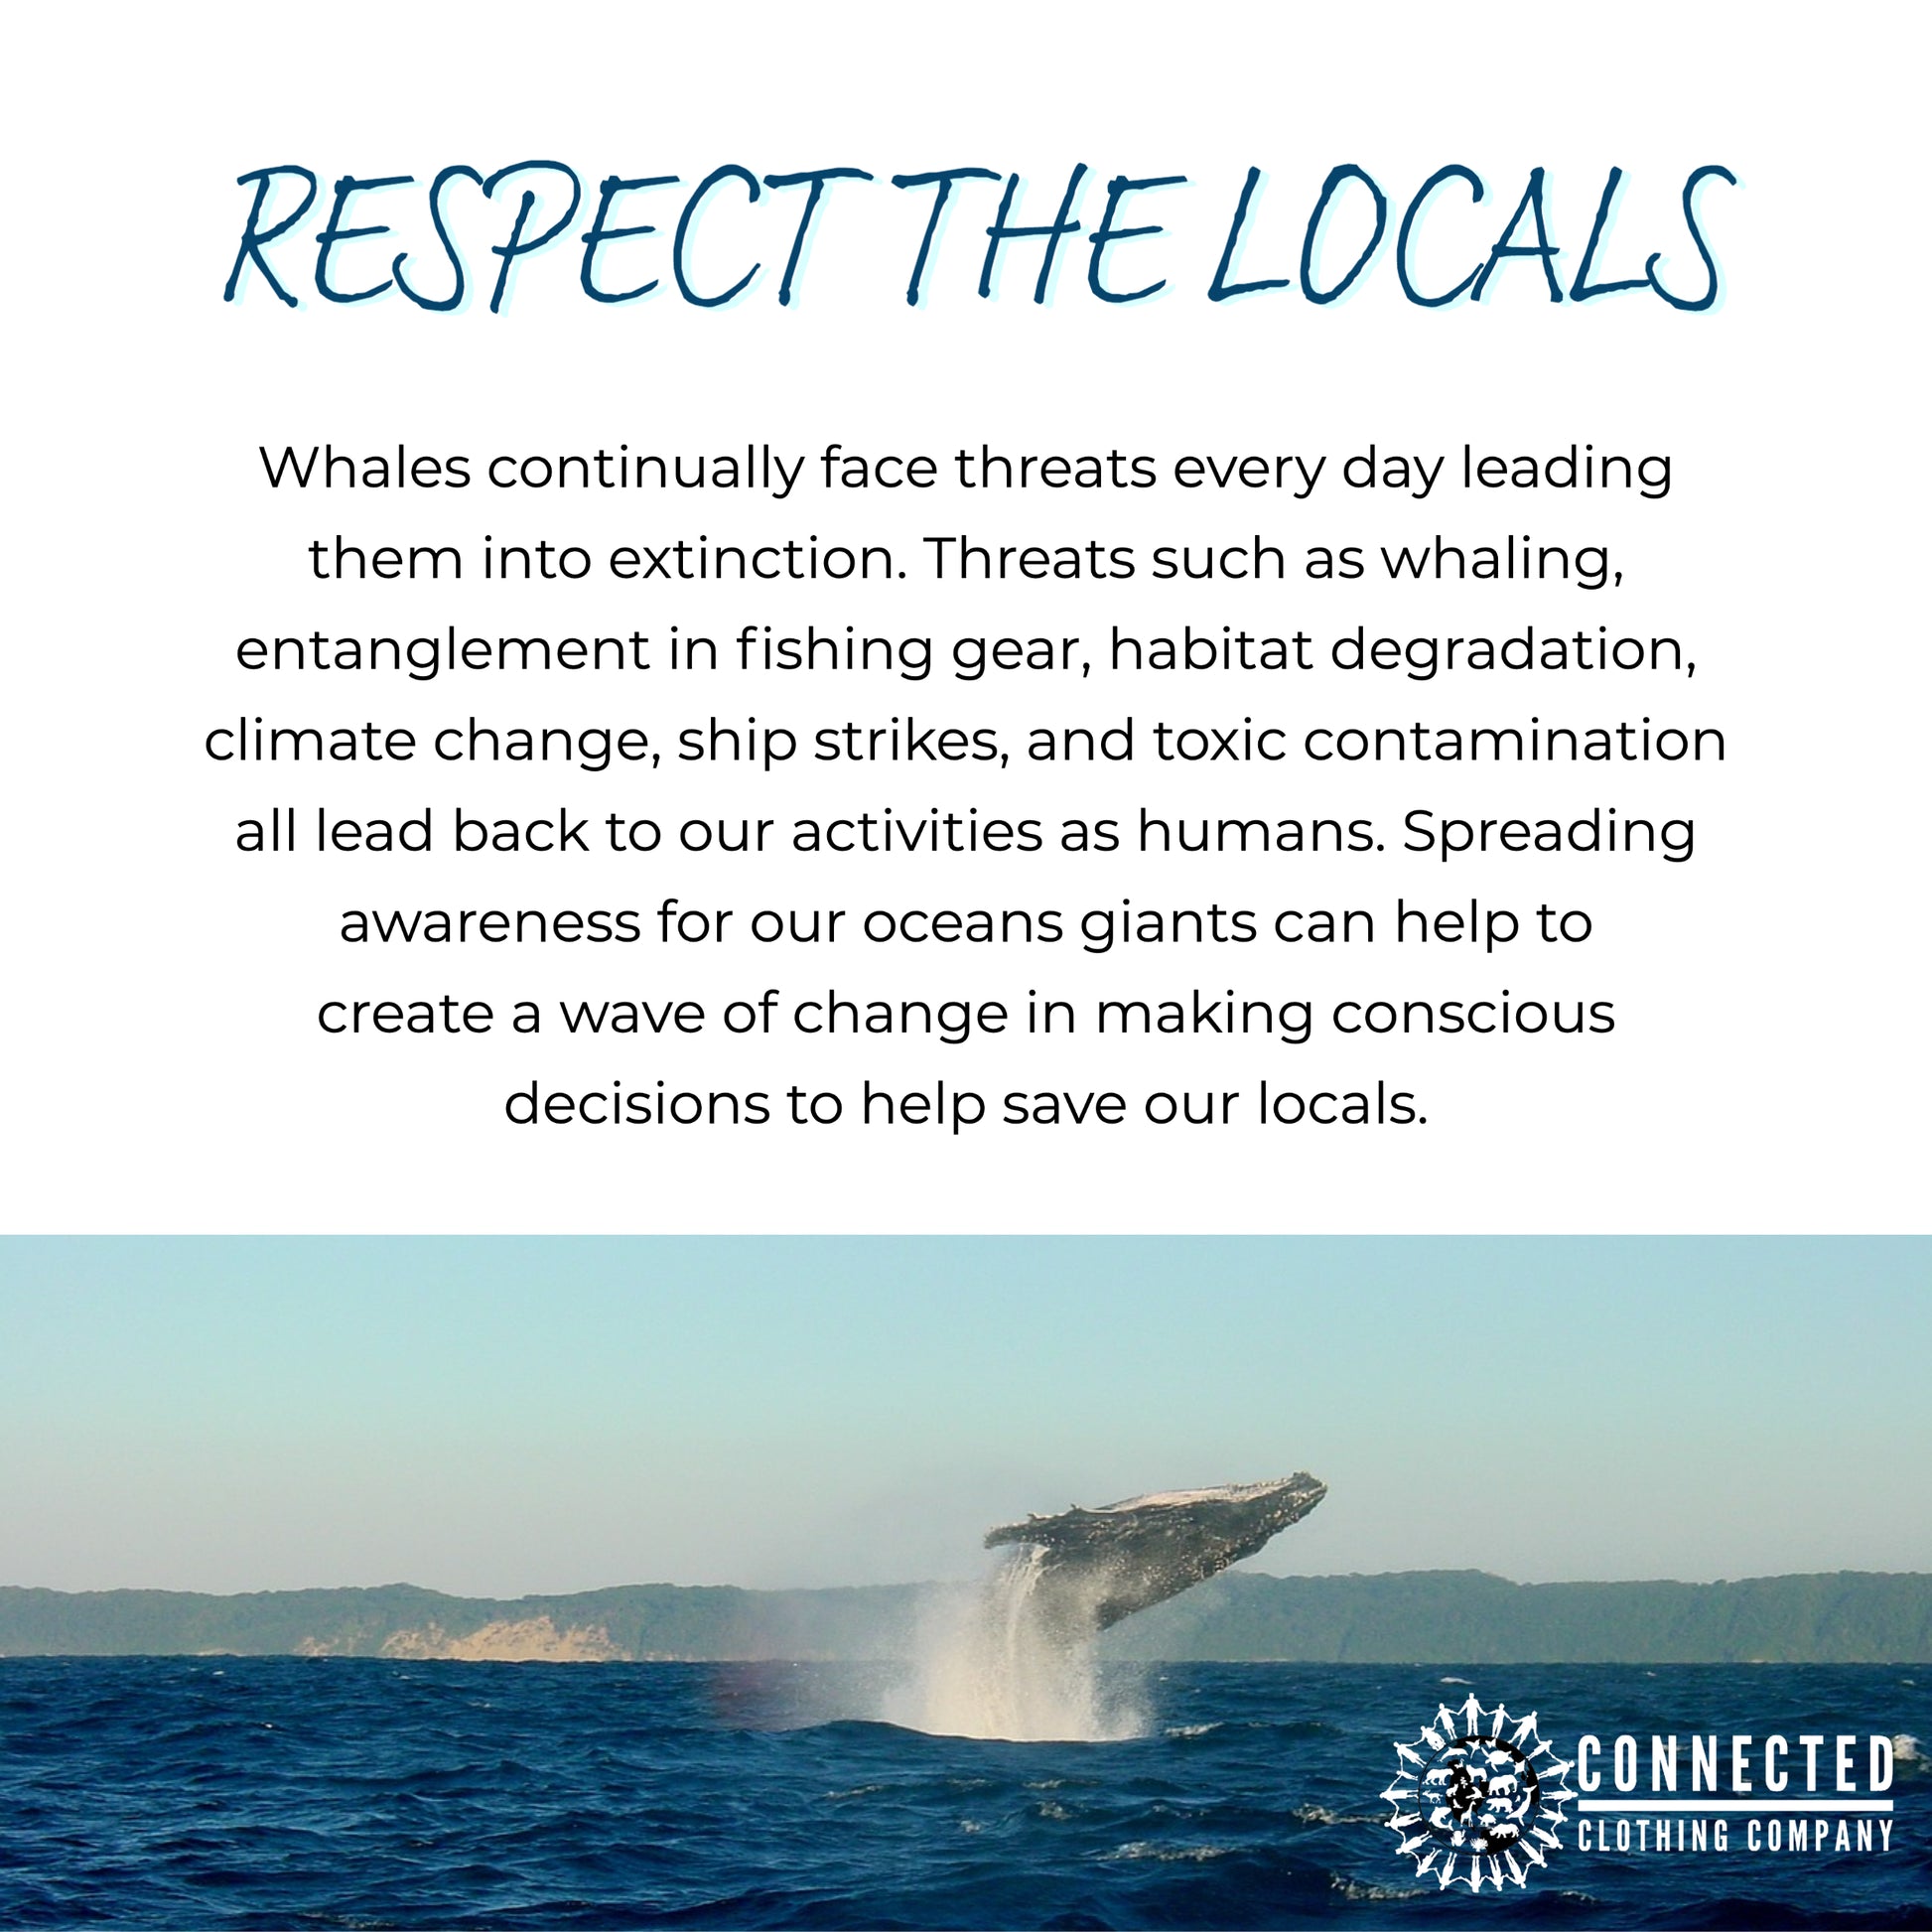 White Respect The Locals Whale Classic Mug - Connected Clothing Company - Ethically and Sustainably Made - 10% of profits donated to ocean conservation